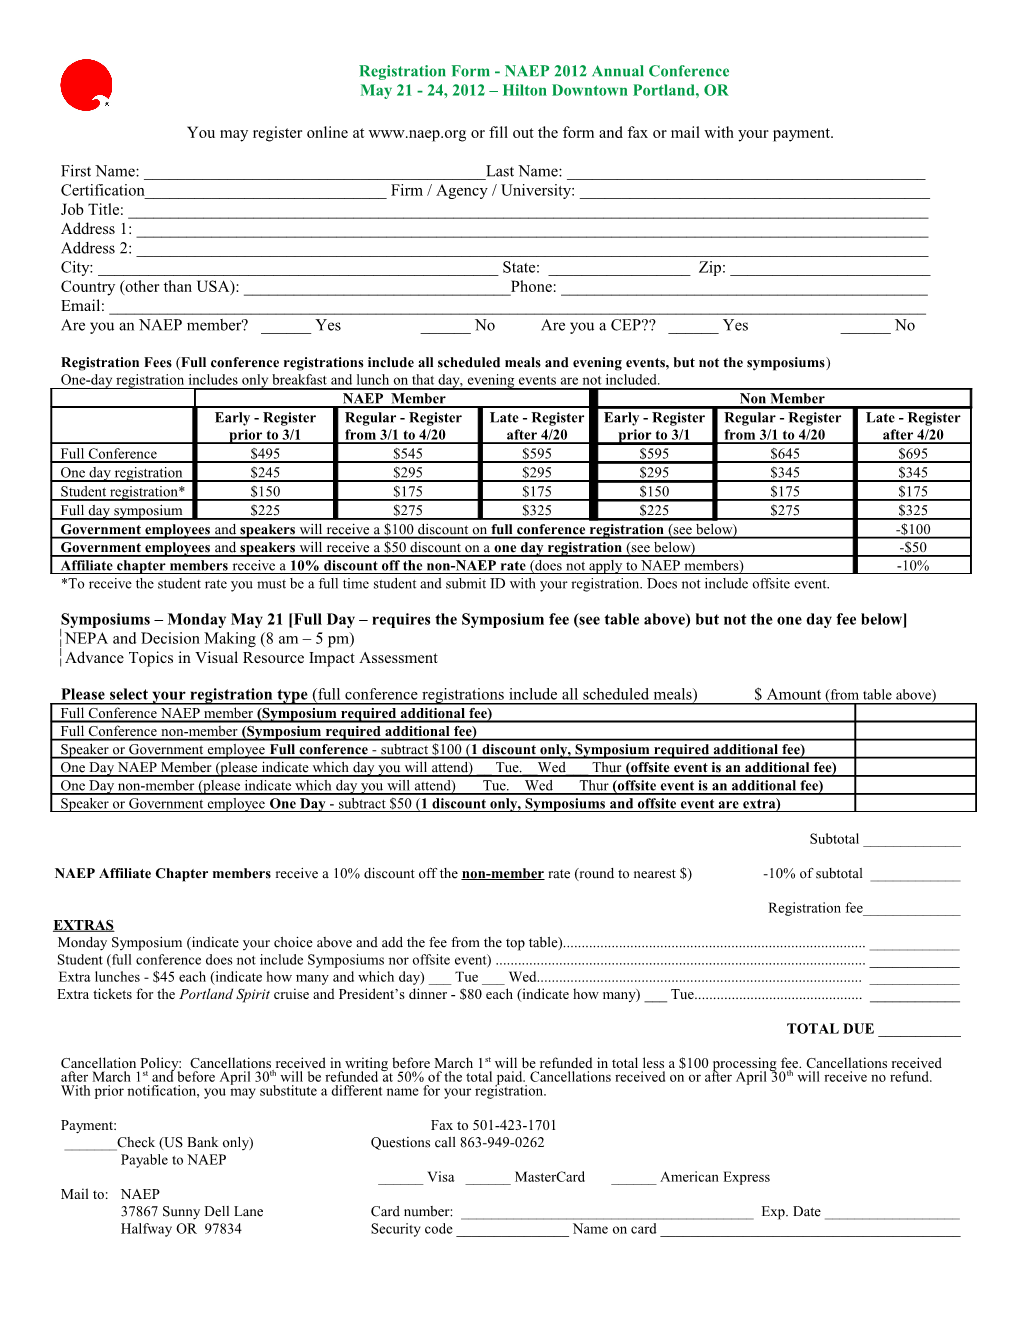 Registration Form for NAEP/AEP 2008 Conference